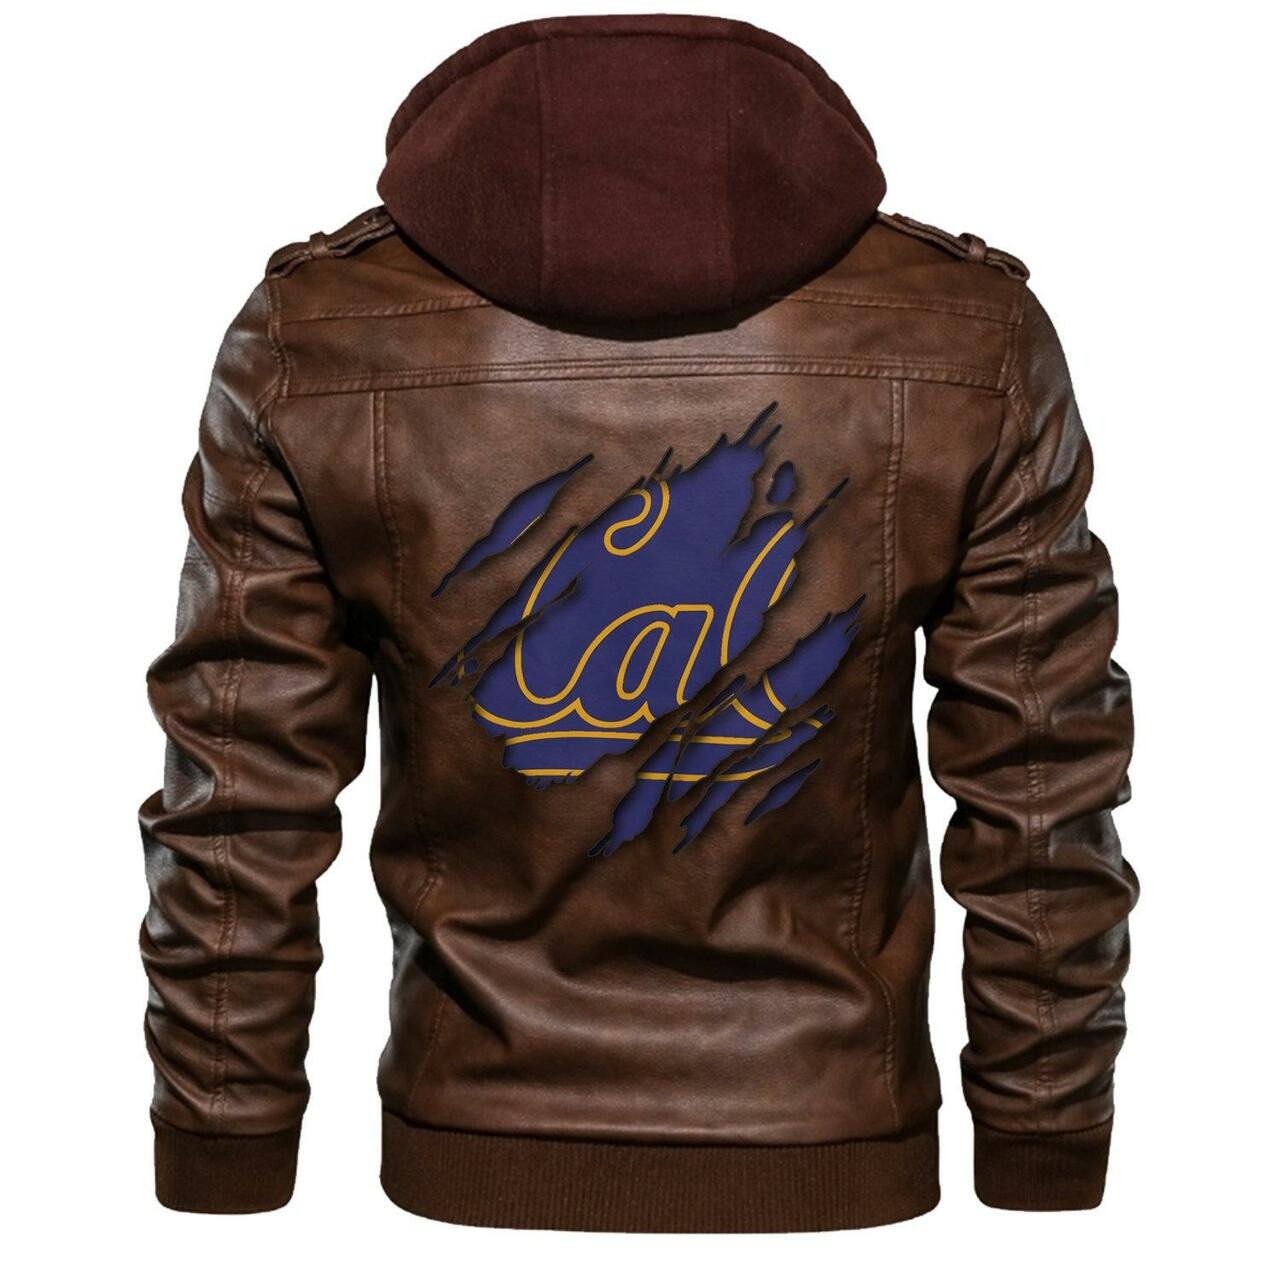 Top leather jackets are the perfect choice for the active man. 289